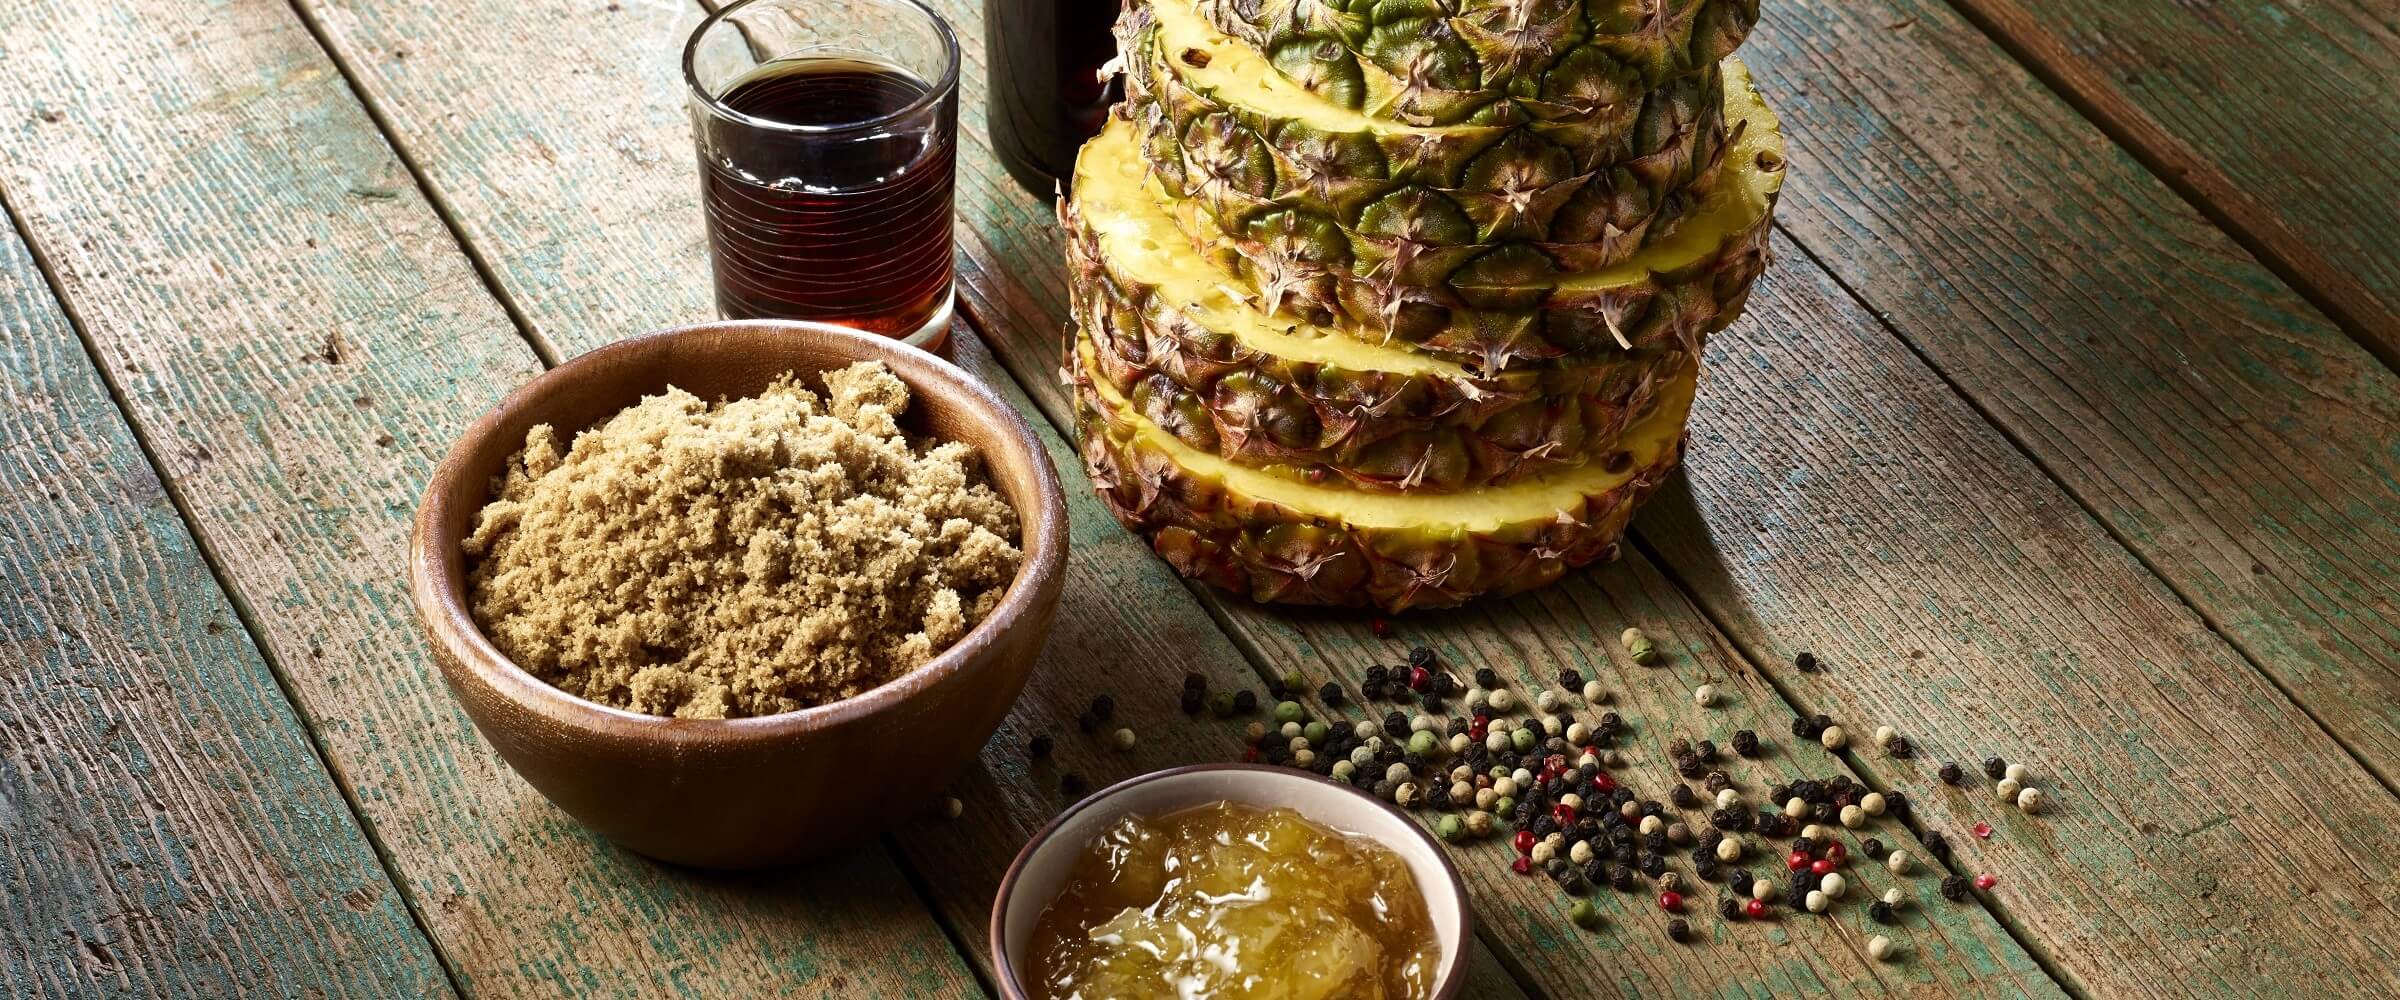 pineapple rum glaze in bowl with its ingredients displayed